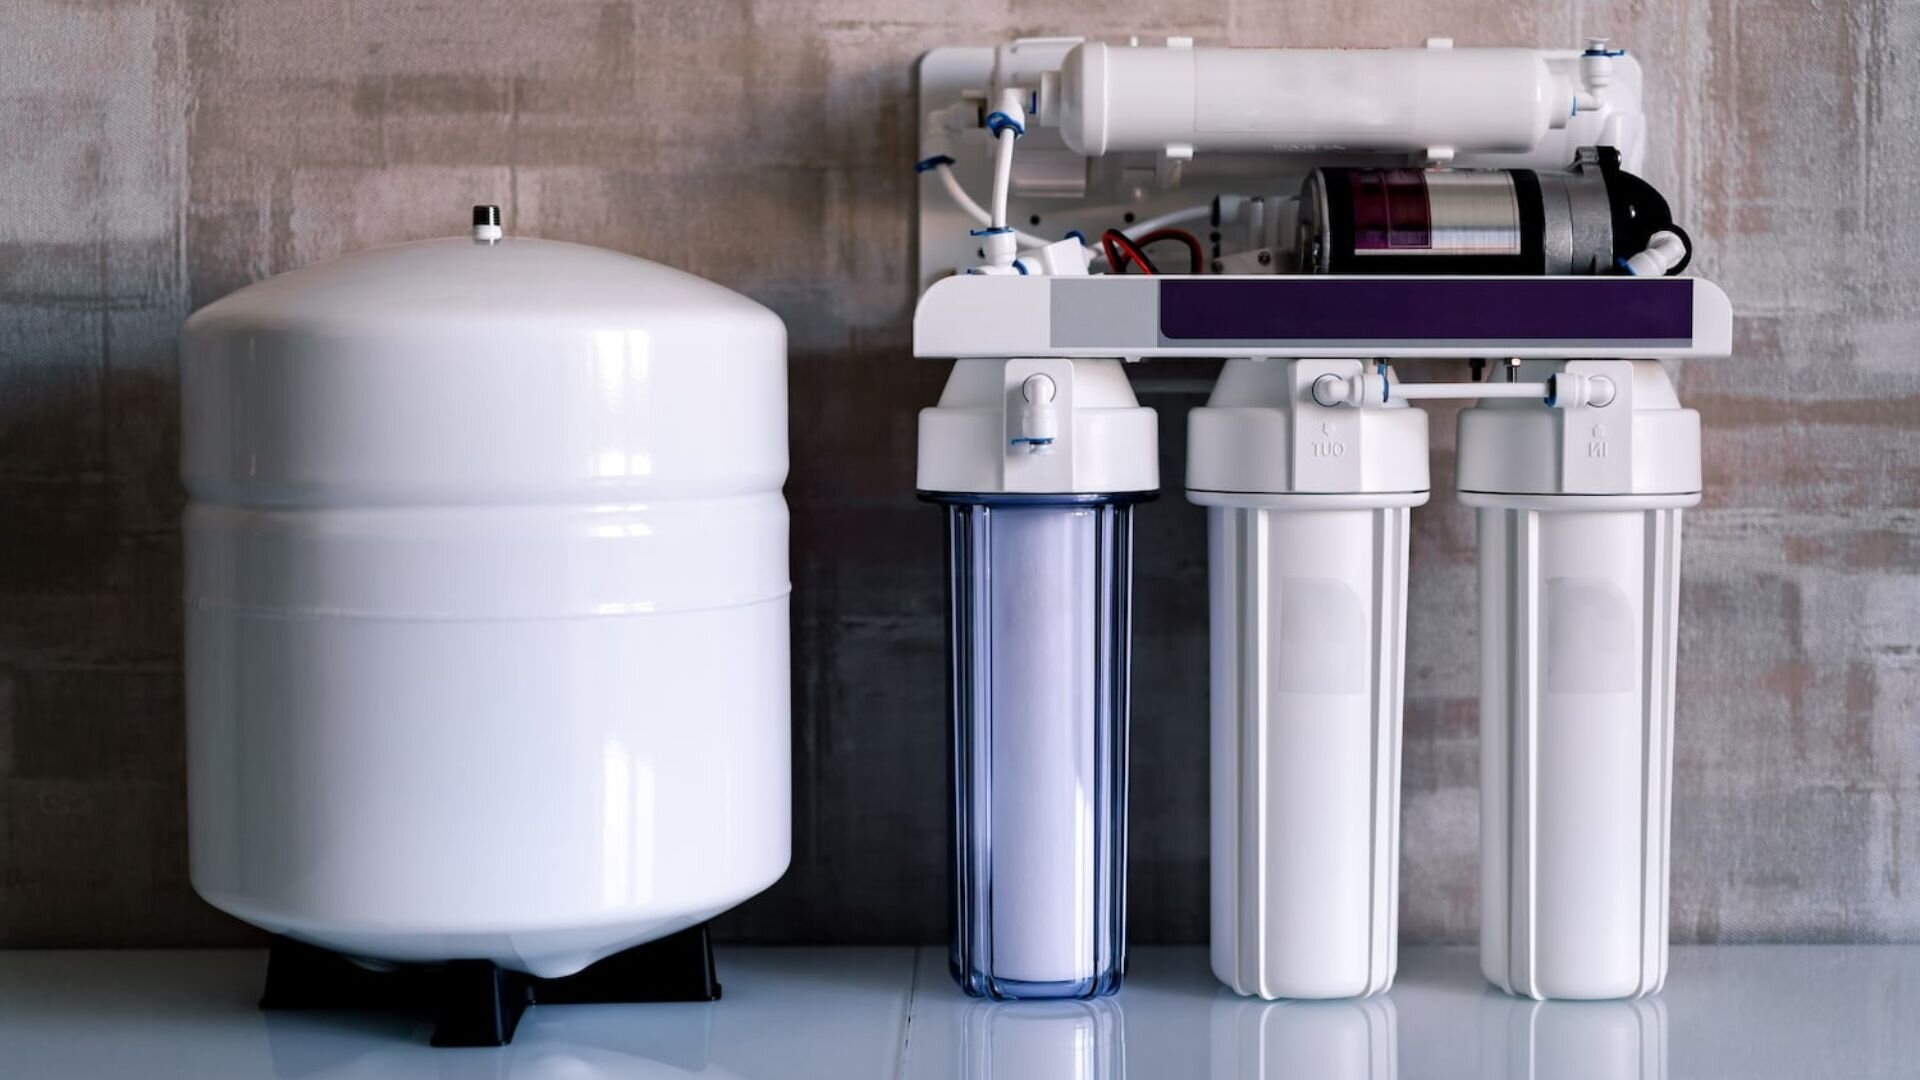 Water Filter Cartridges: When Should You Replace Them? ‐ WP Plumbing